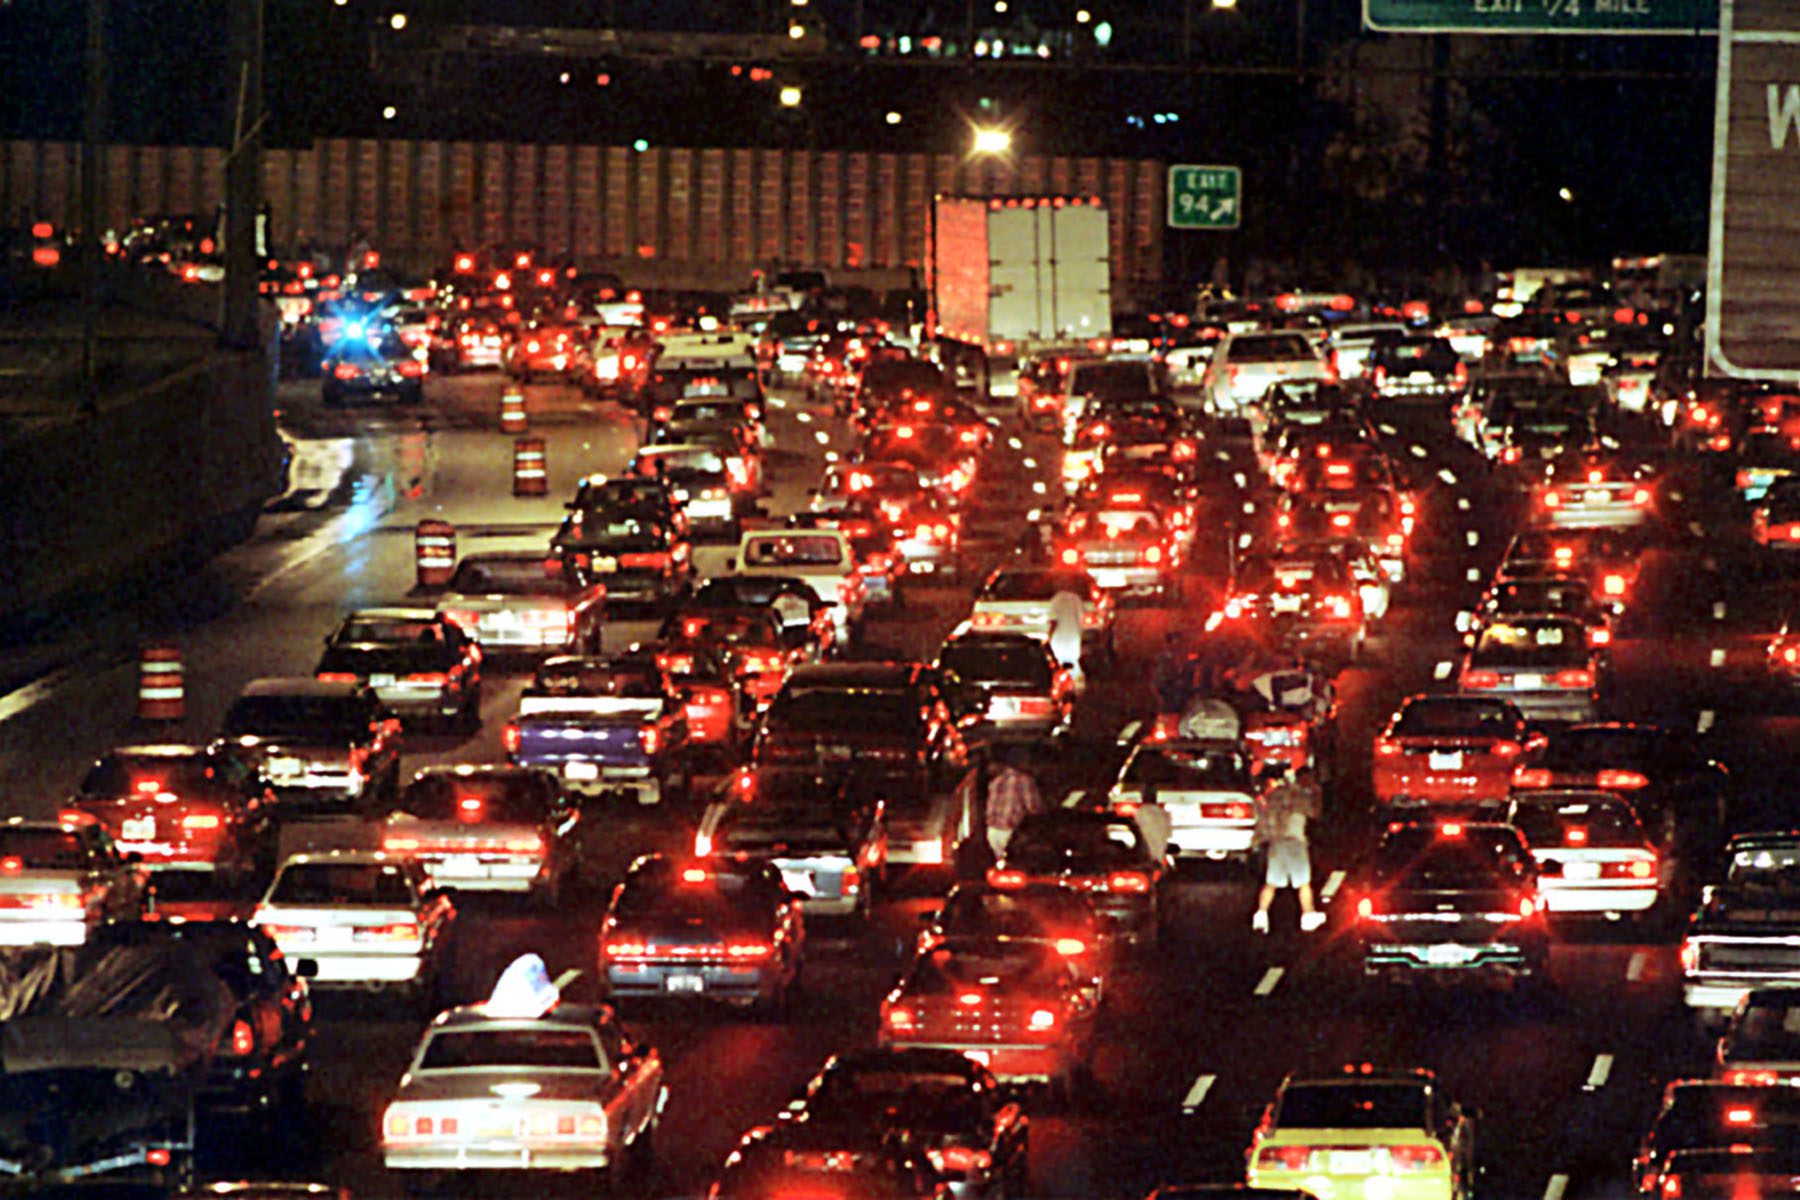 Photo of gridlocked traffic at nighttime